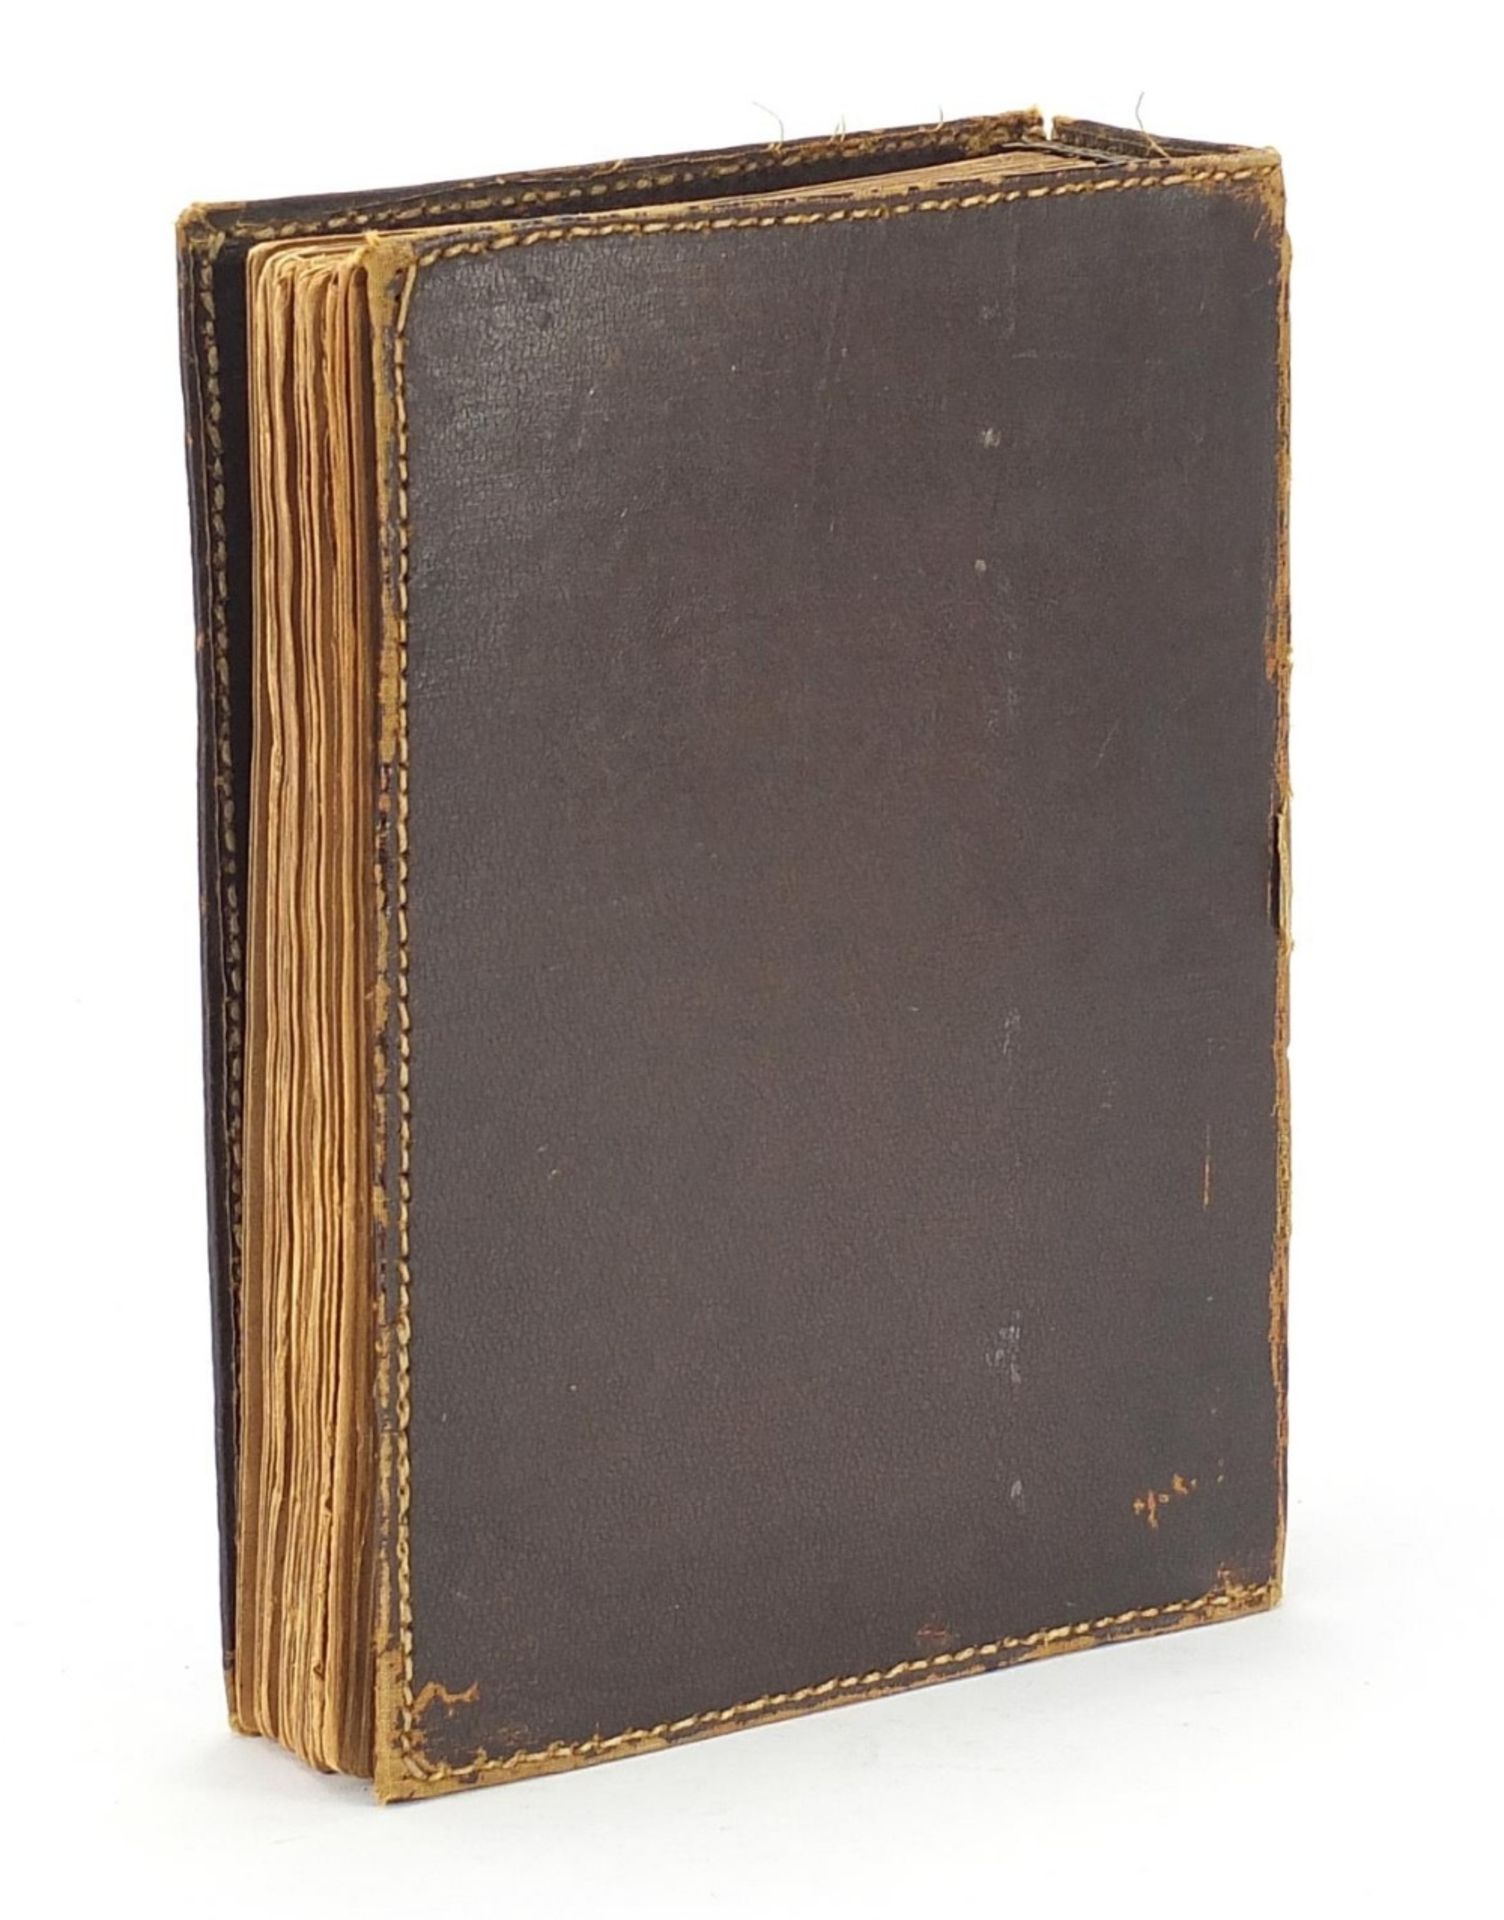 Mein Kampf by Adolf Hitler, unexpurgated edition arranged in a binder : For Further Condition - Image 4 of 4